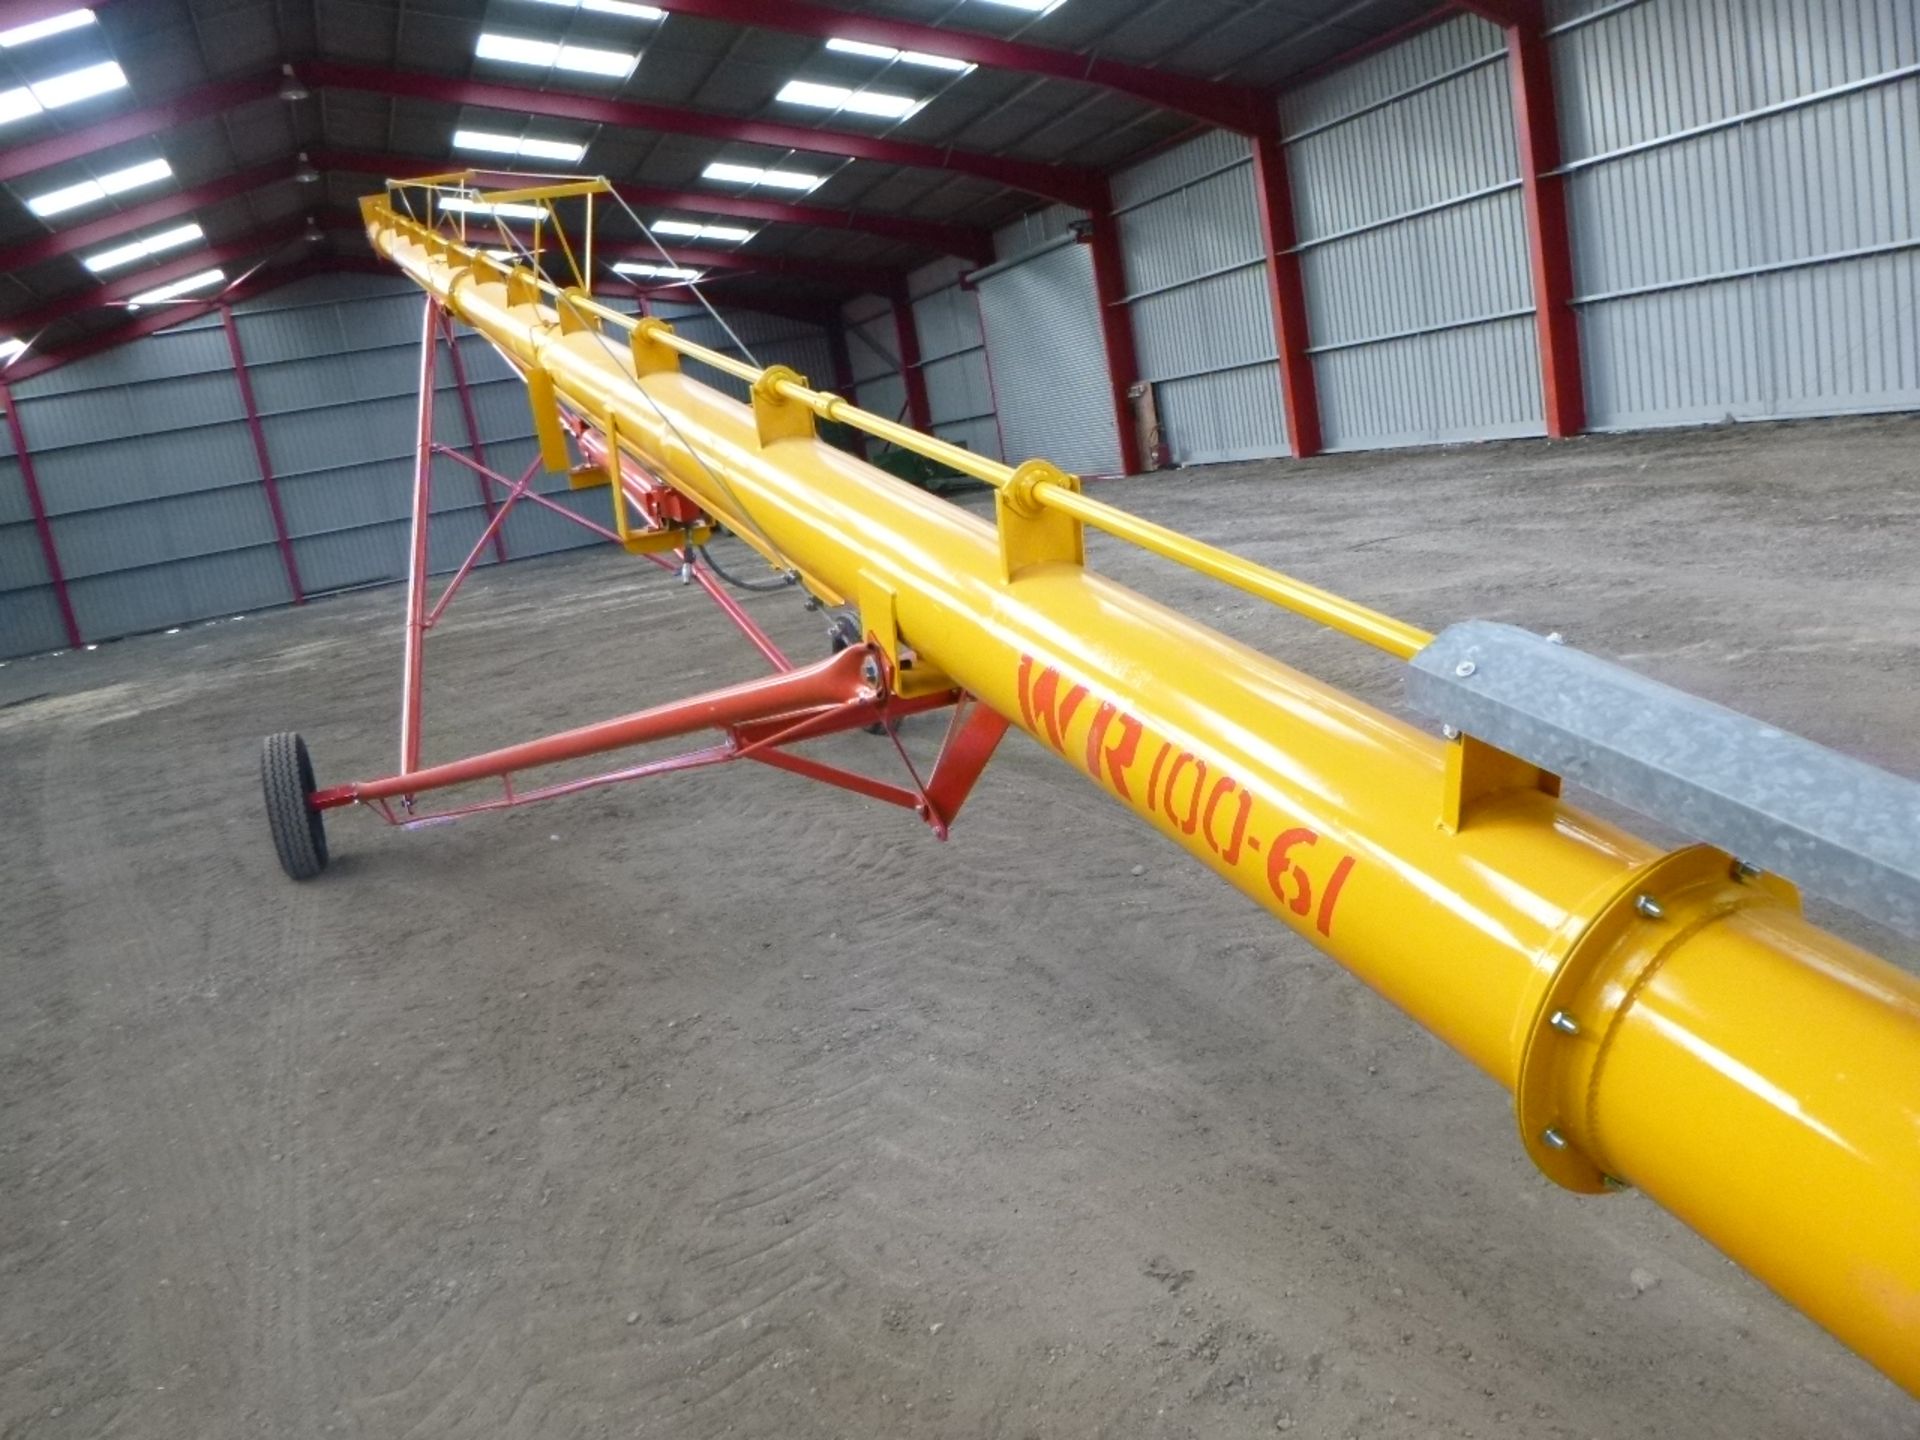 Westfield WR 100-61 Grain Auger, approx. 61'/18.5m long, 10in./250mm dia., capacity up to 120tph, - Image 14 of 18